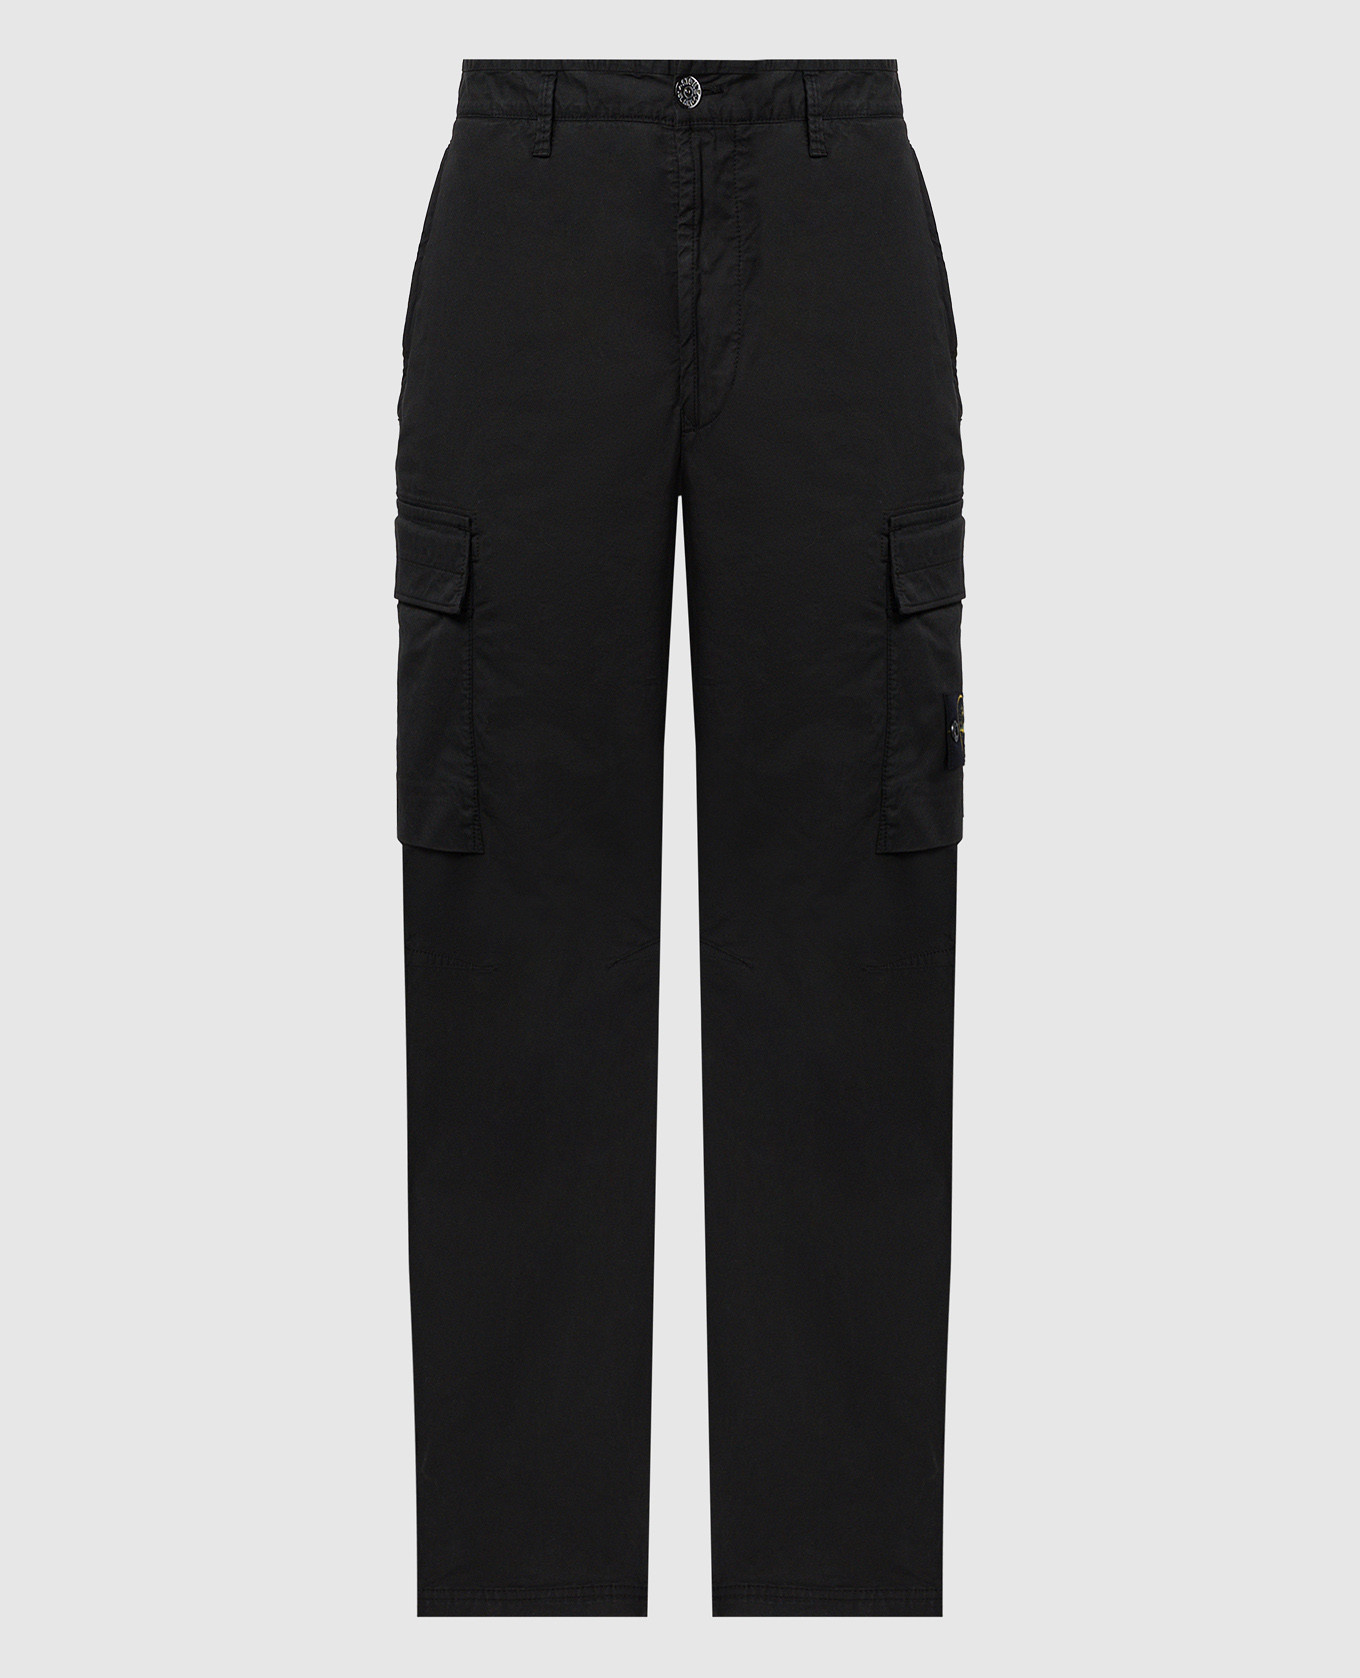 Black cargo pants with logo patch